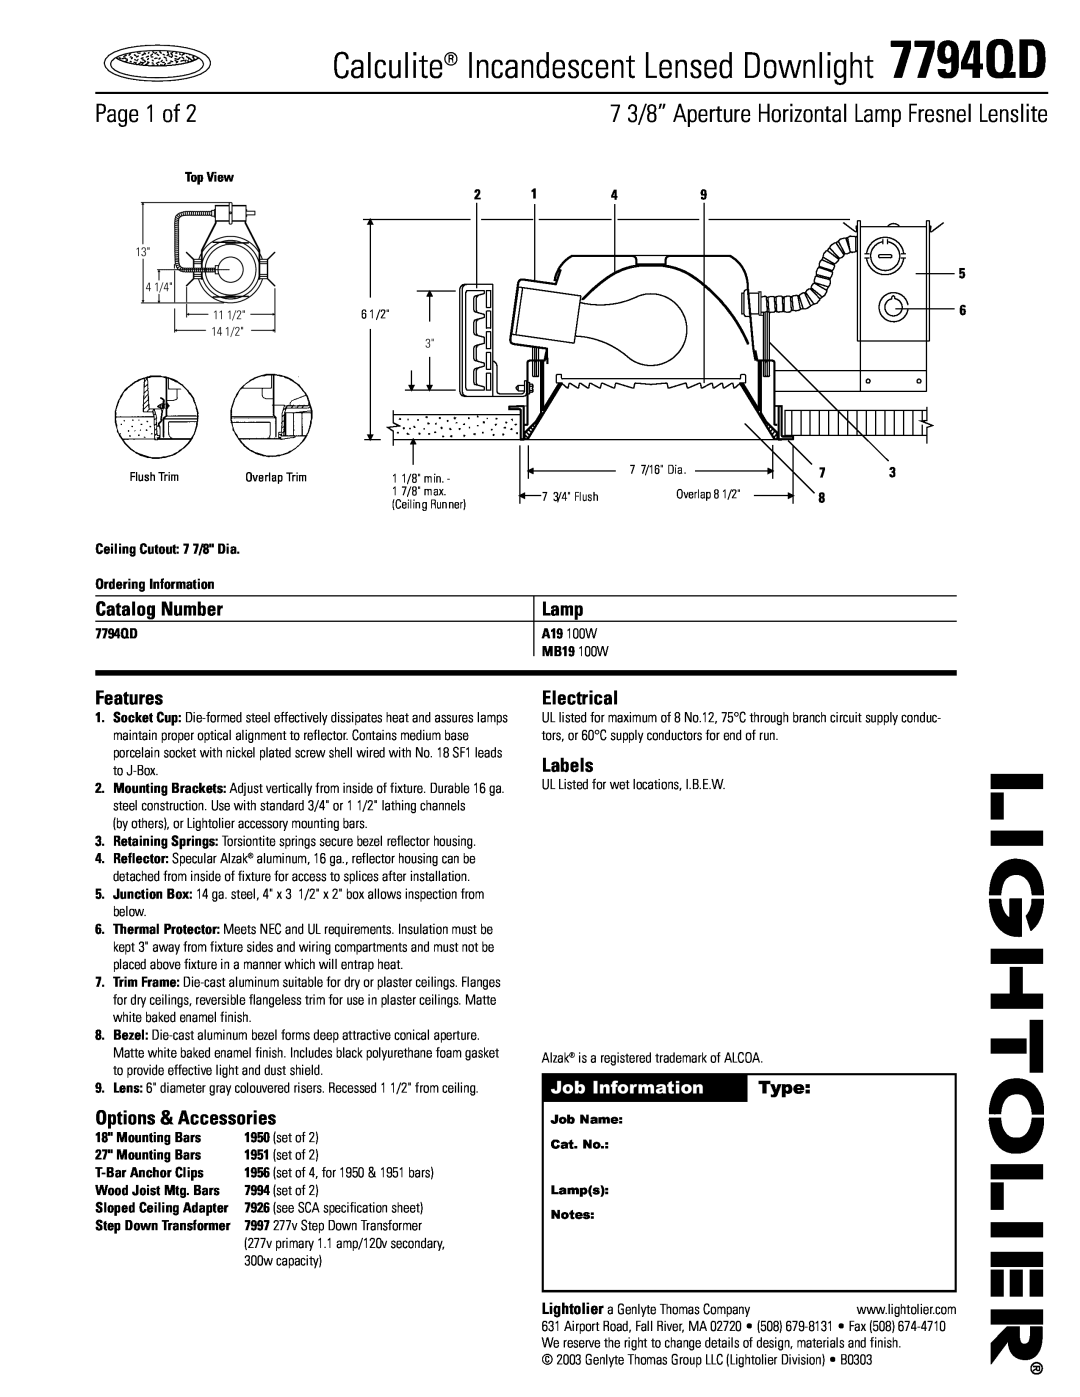 Lightolier specifications Job Information, Type, Calculite Incandescent Lensed Downlight 7794QD, Page 1 of, Lamp 